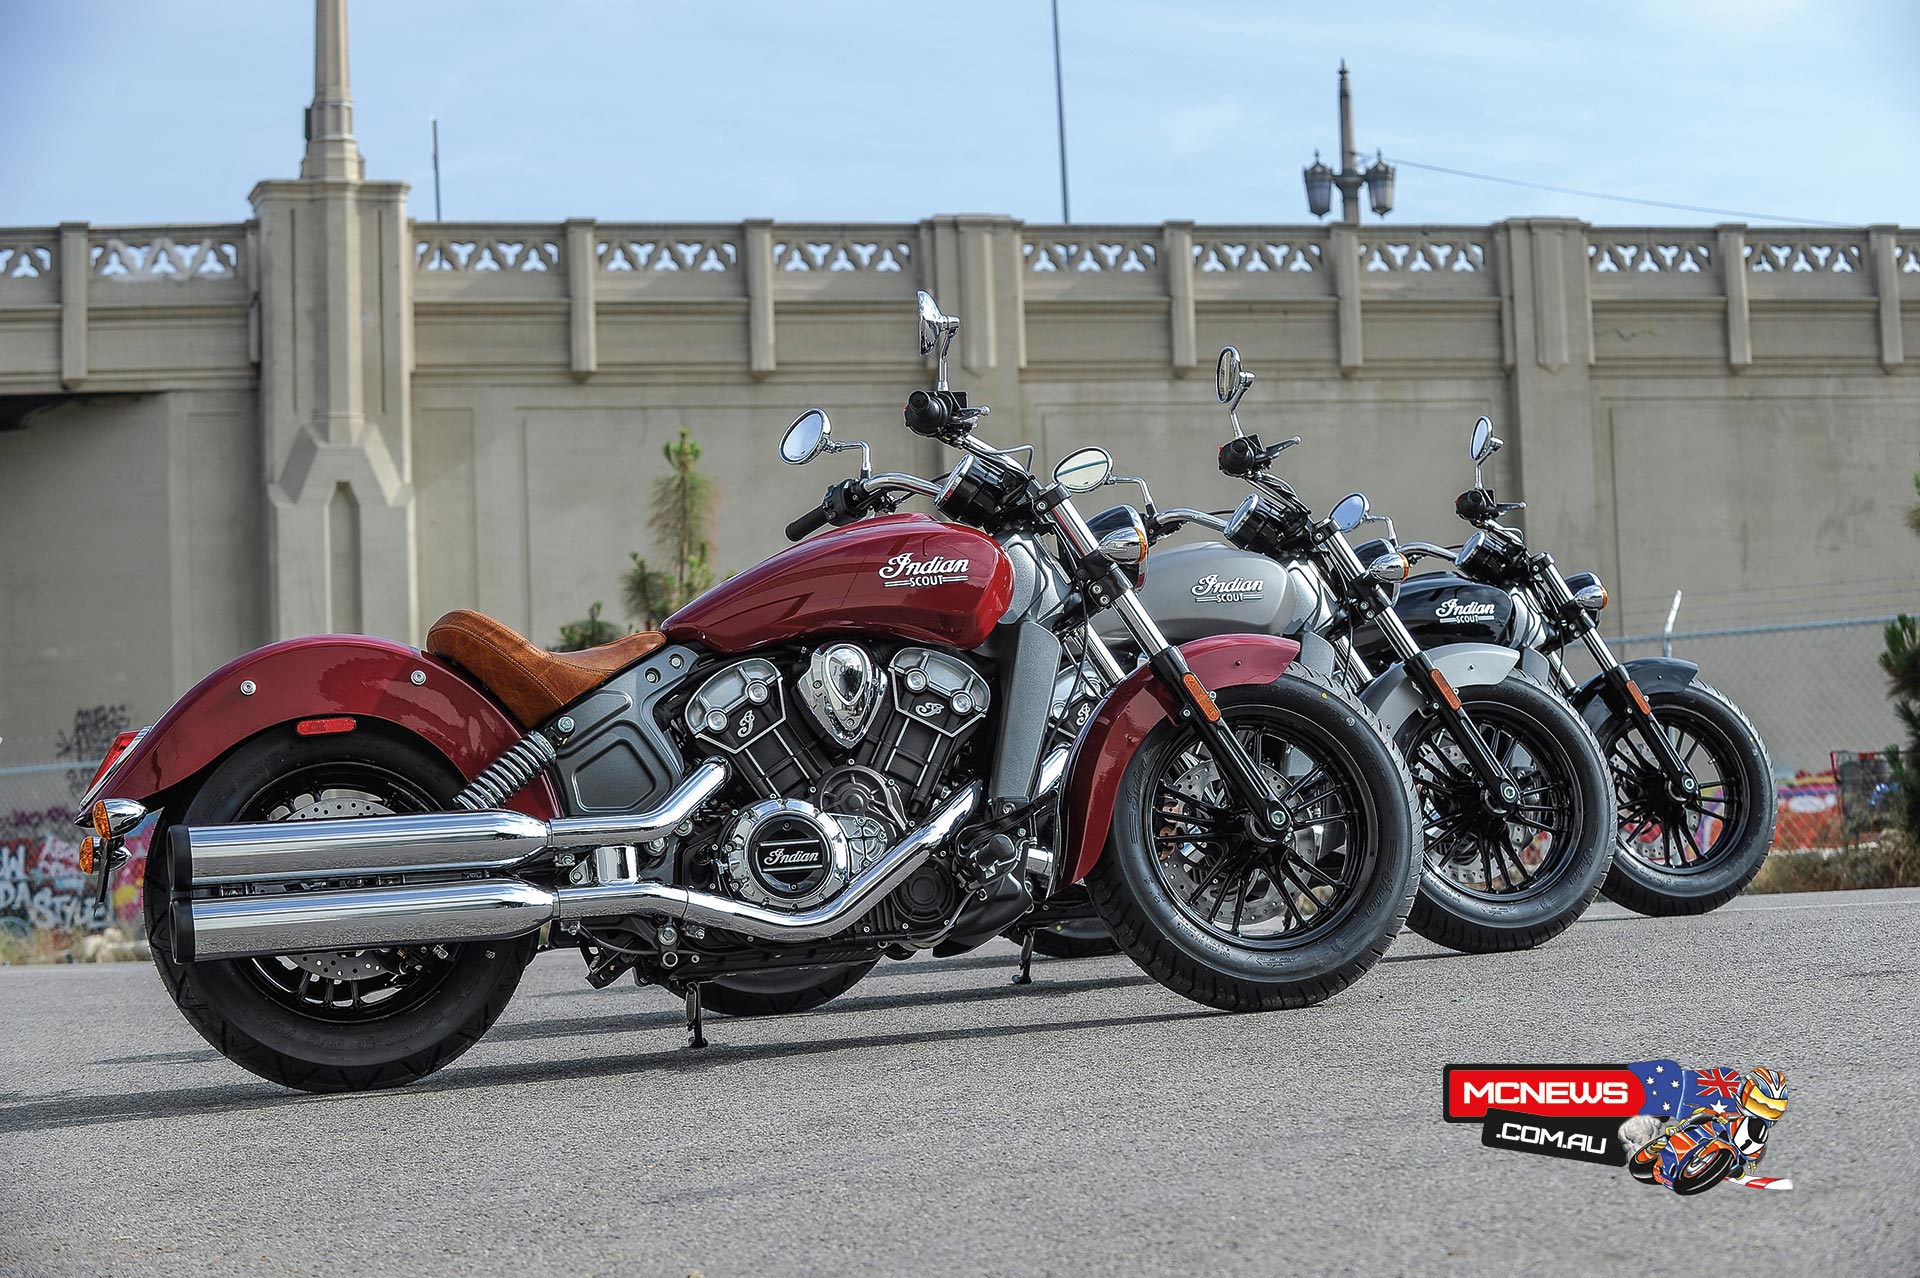 Indian Scout reveal surprises with new 1133cc v-twin